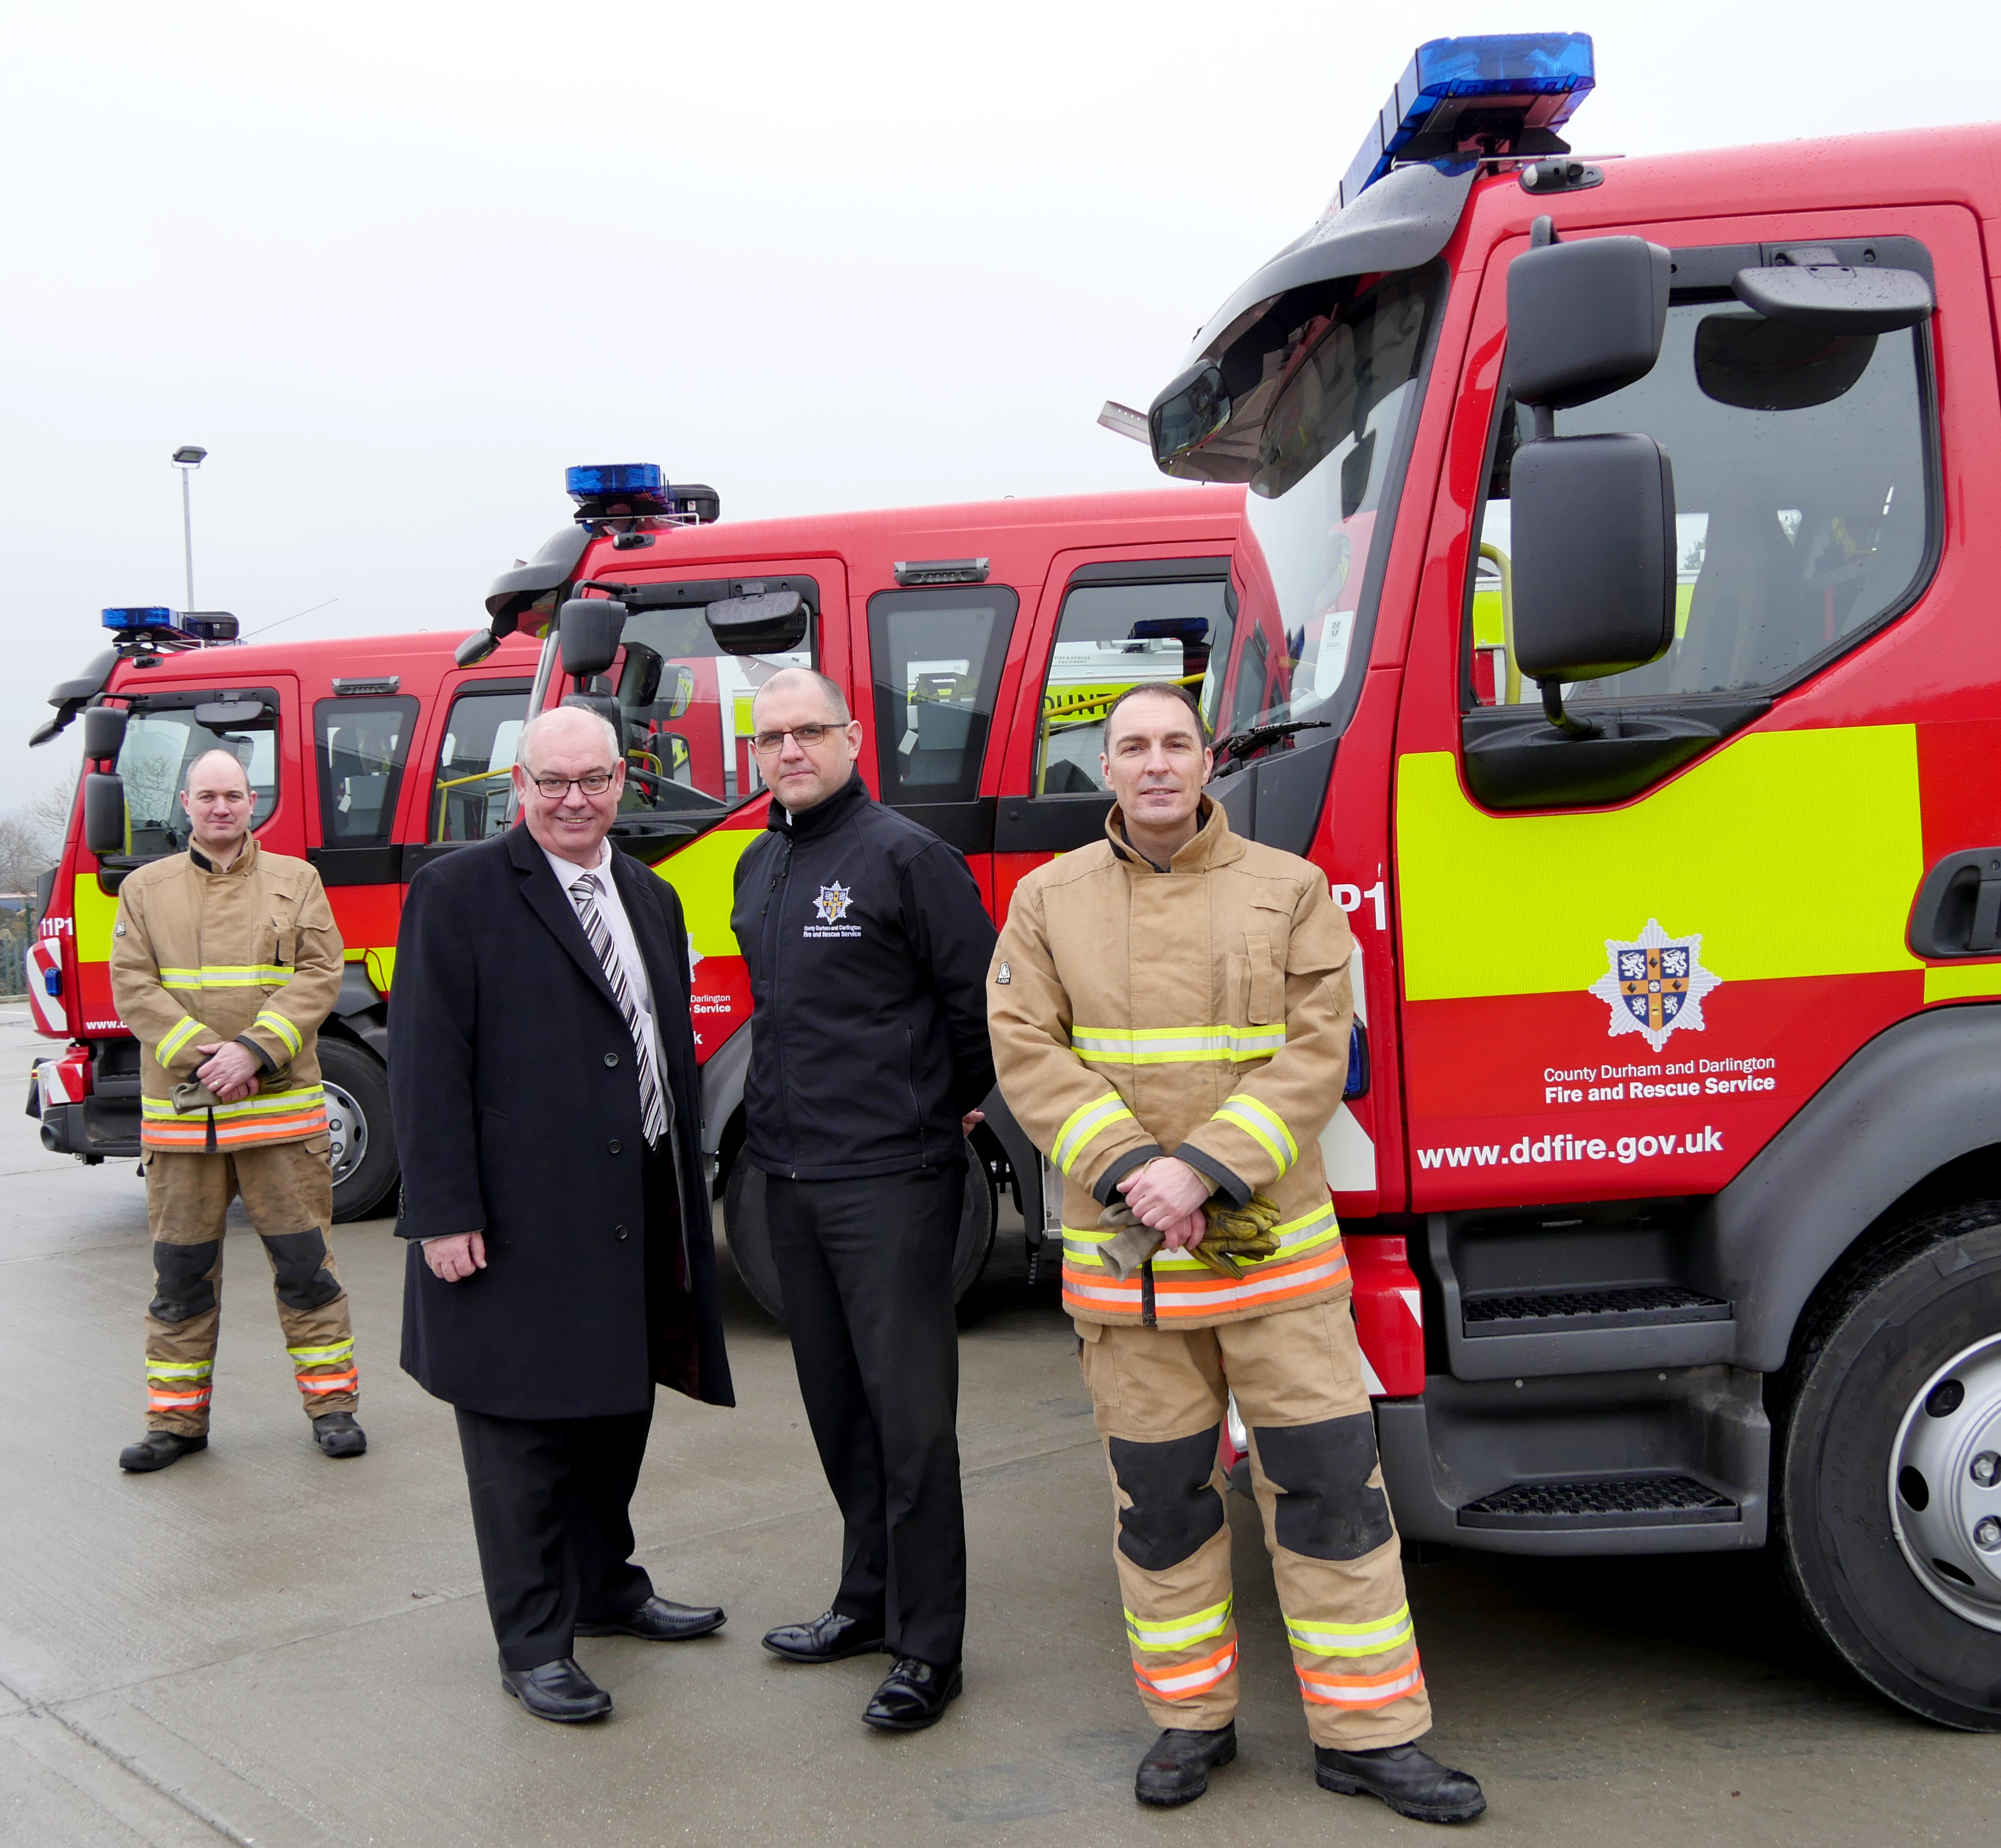 New Fire Appliances Ready For Action